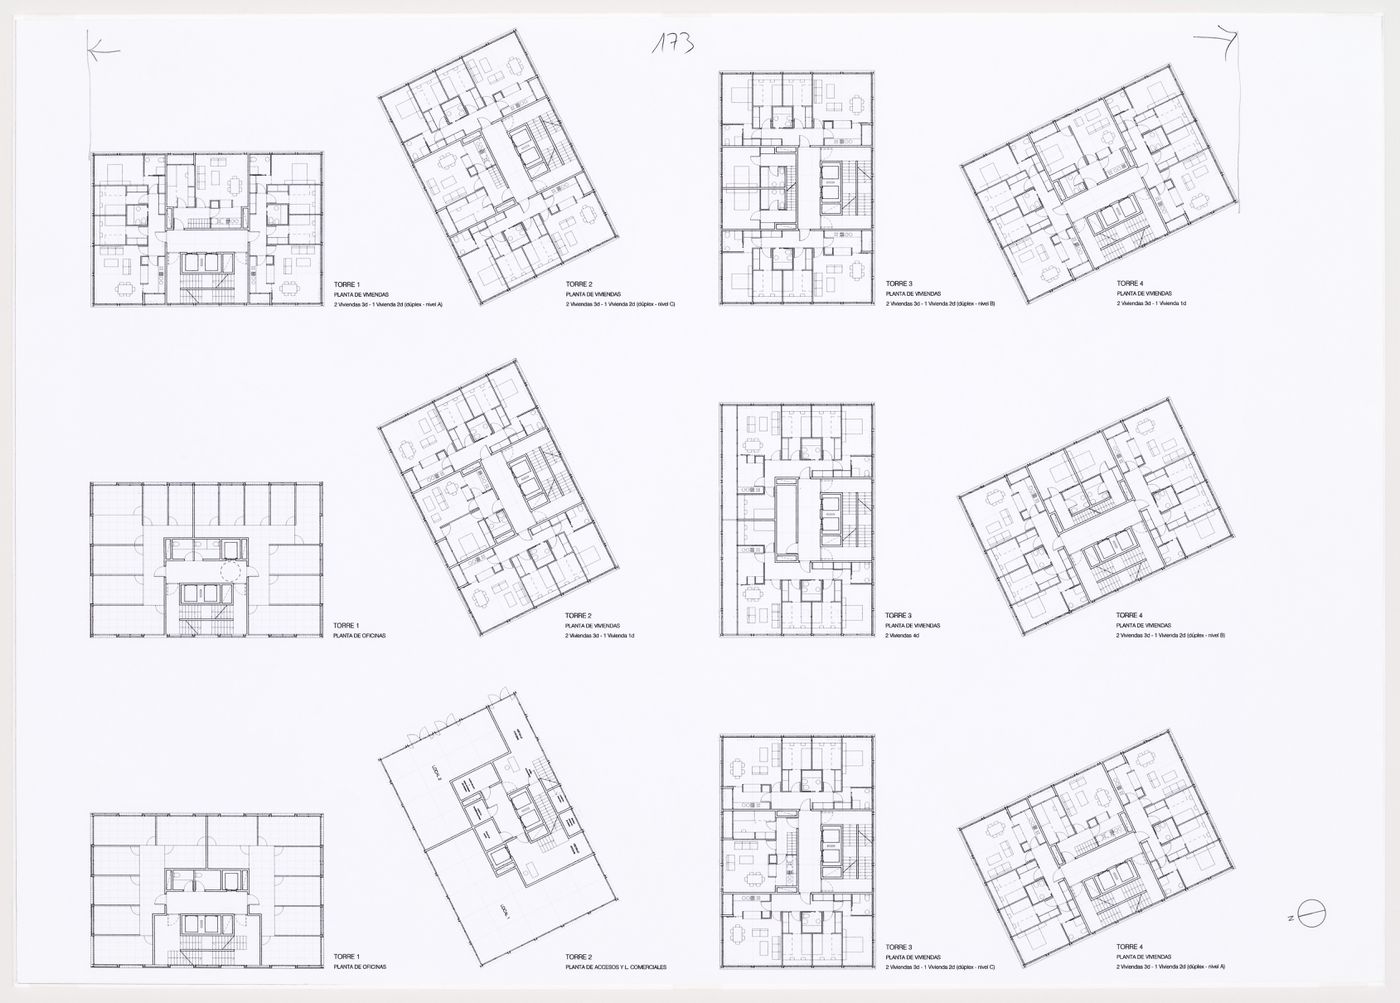 Floor plans of the four towers showing living units, offices and commercial access